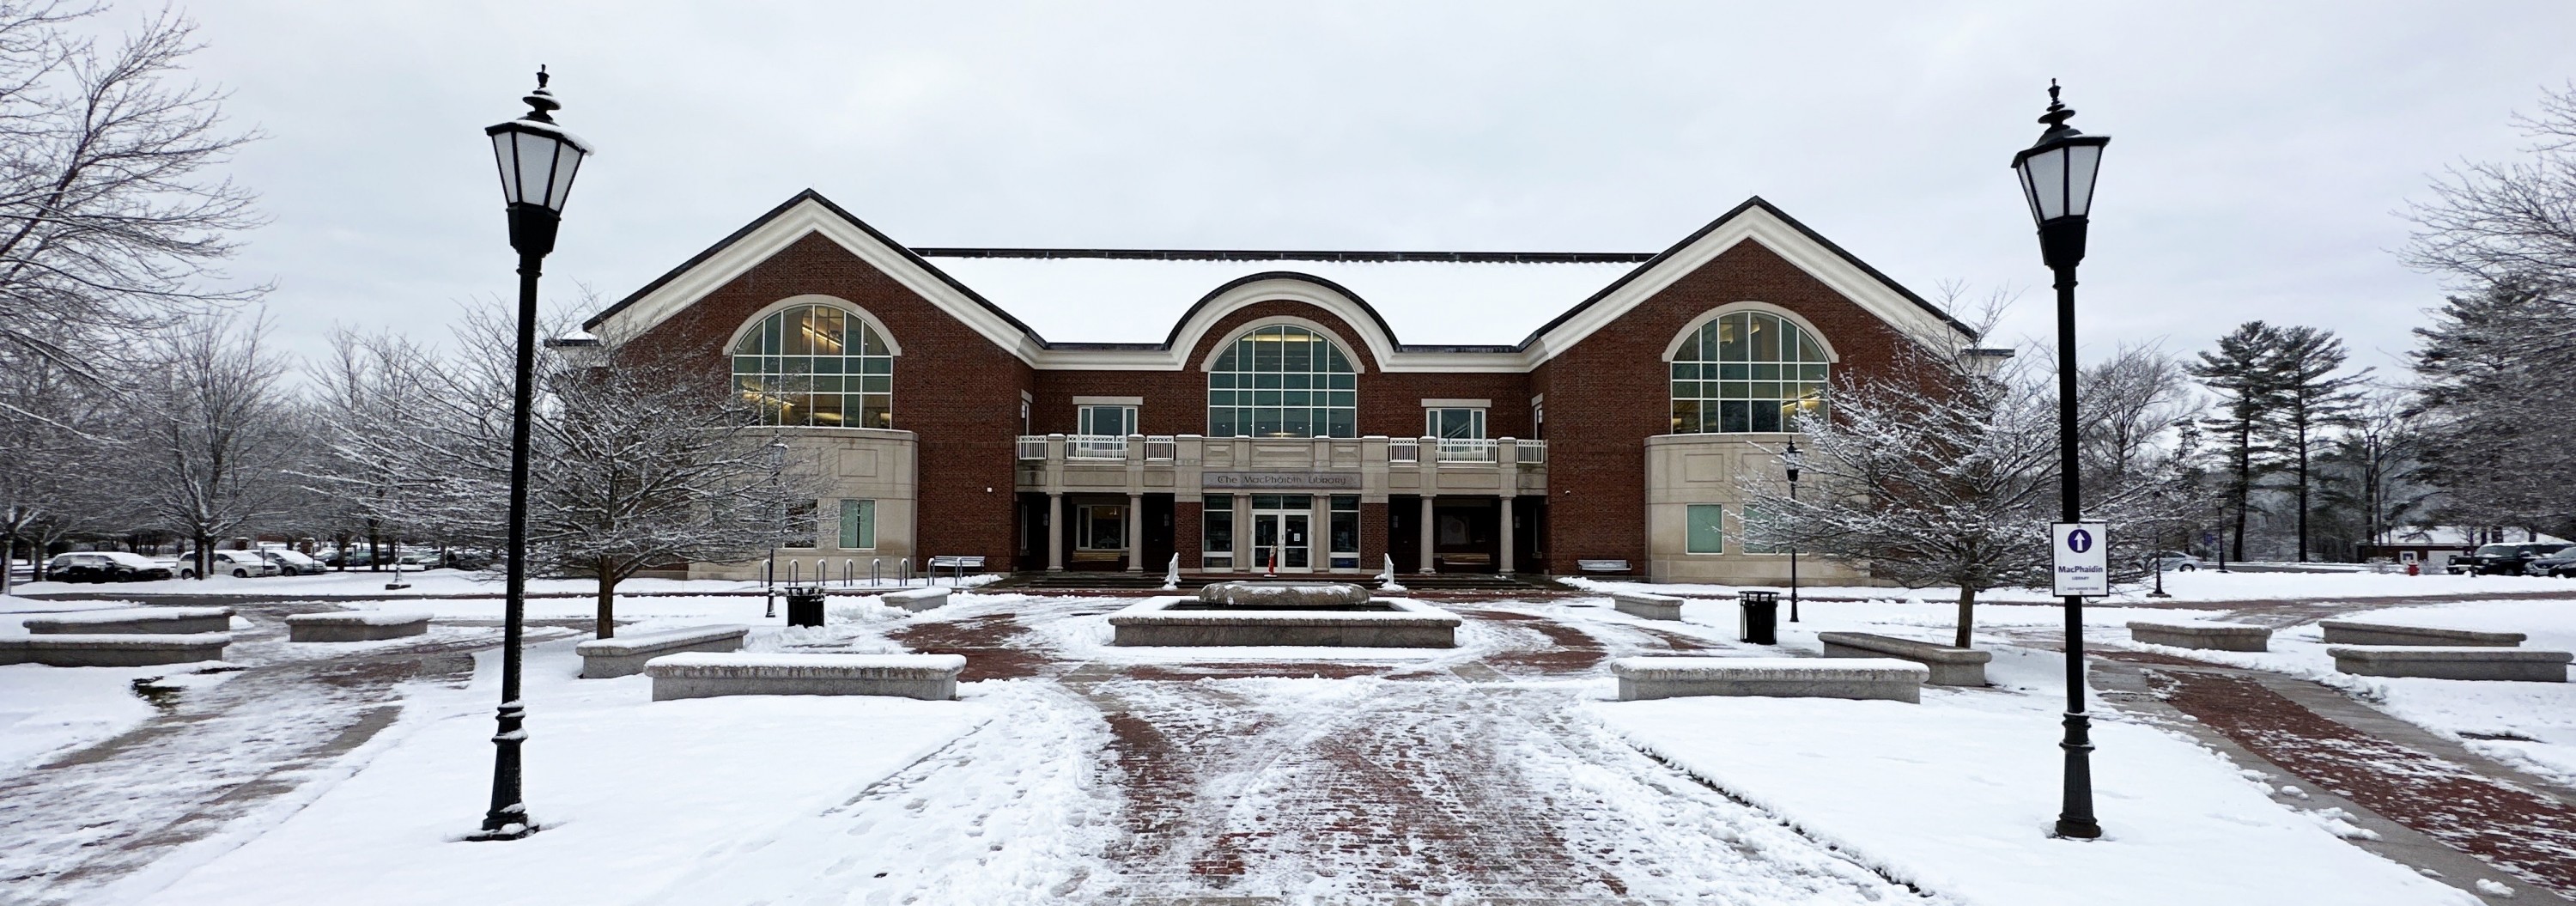 Snowy exterior of the library